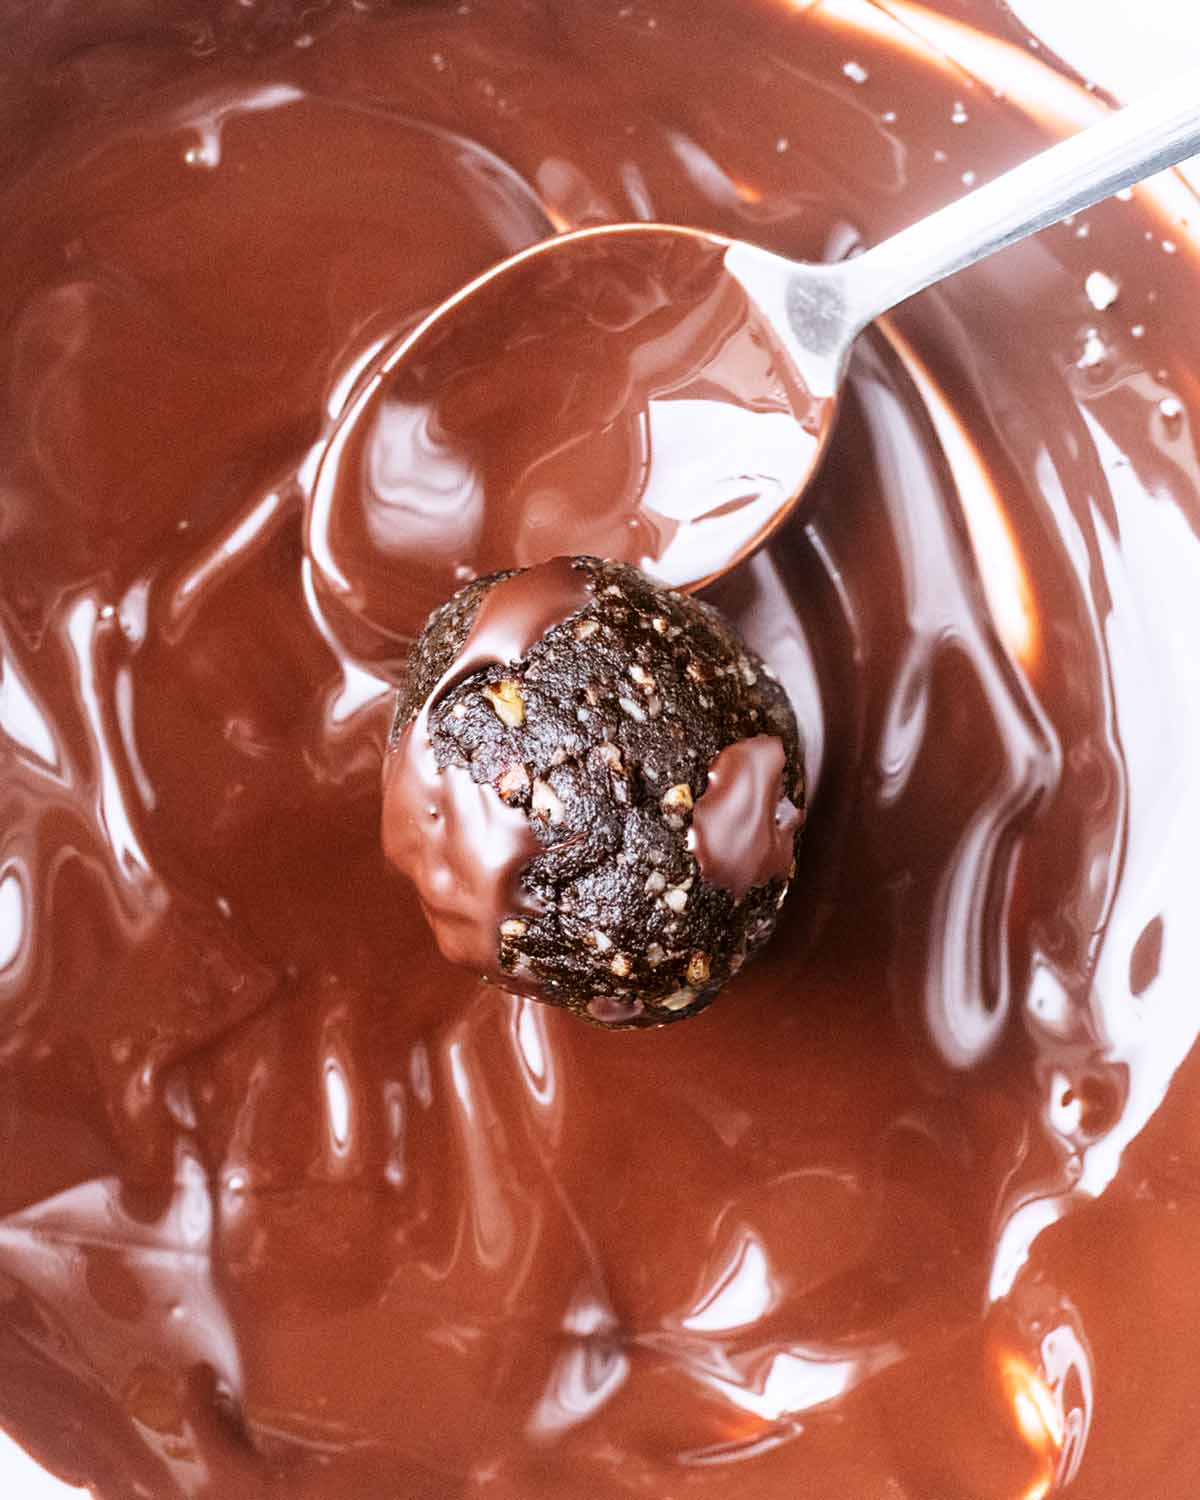 One of the date balls being coated in melted chocolate.